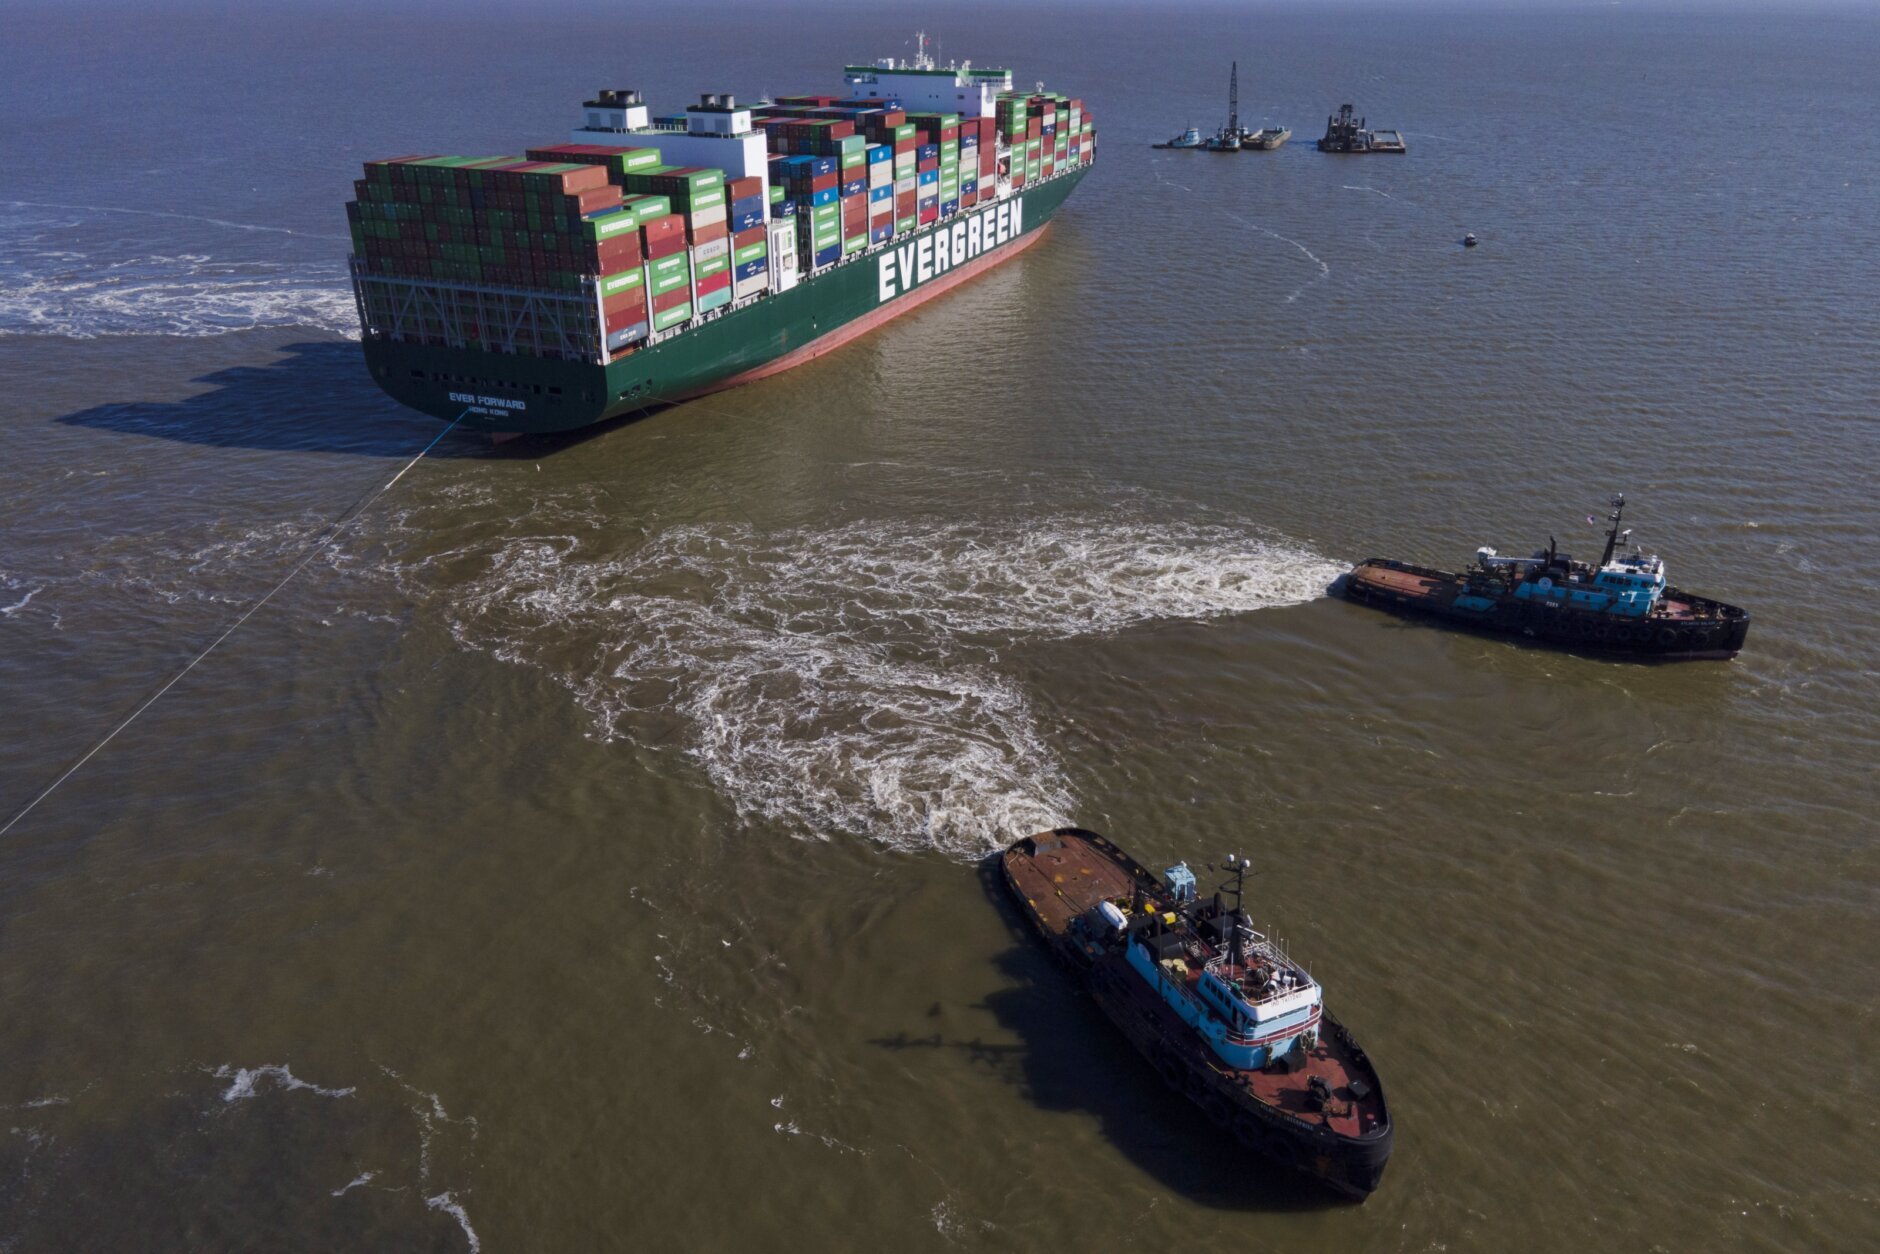 Tugboats Atlantic Enterprise (bottom center) and Atlantic Salvor (right) use ropes to tow the container ship Ever Forward, which ran aground in the Chesapeake Bay as crews attempted to refloat the ship Tuesday, March 29, 2022 make Pasadena, Md. (AP Photo/Julio Cortez)